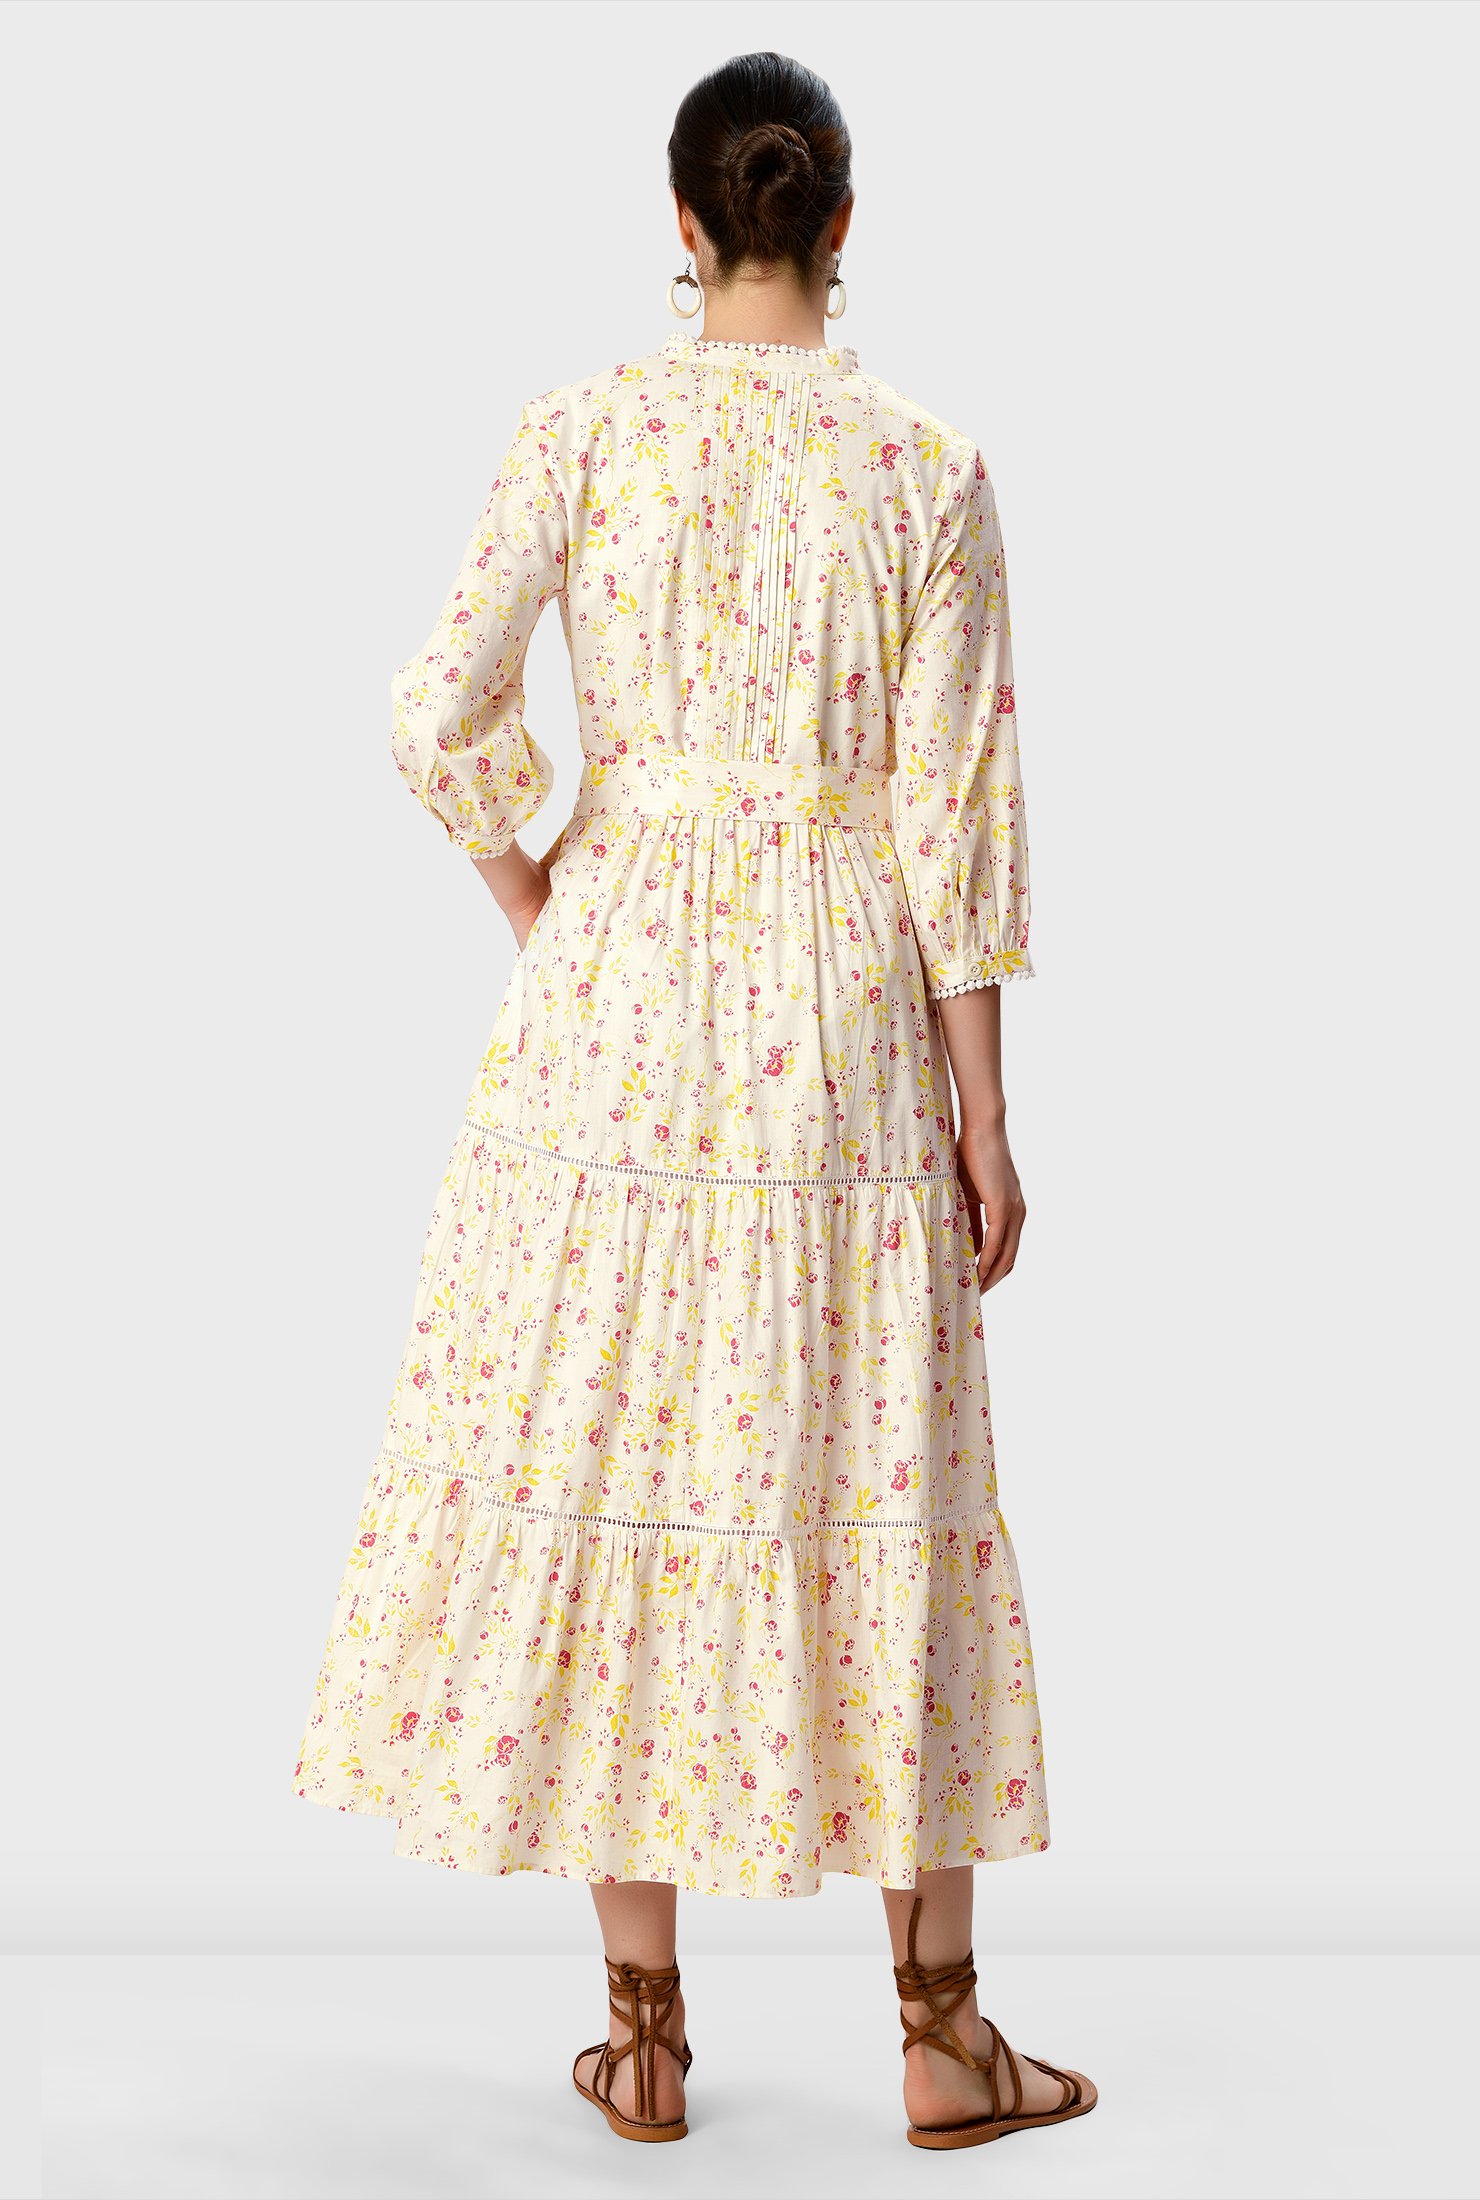 Floral print cotton poplin in a relaxed silhouette has an added twist with an optional self-sash-tie belt and a ruched pleat tier full skirt.